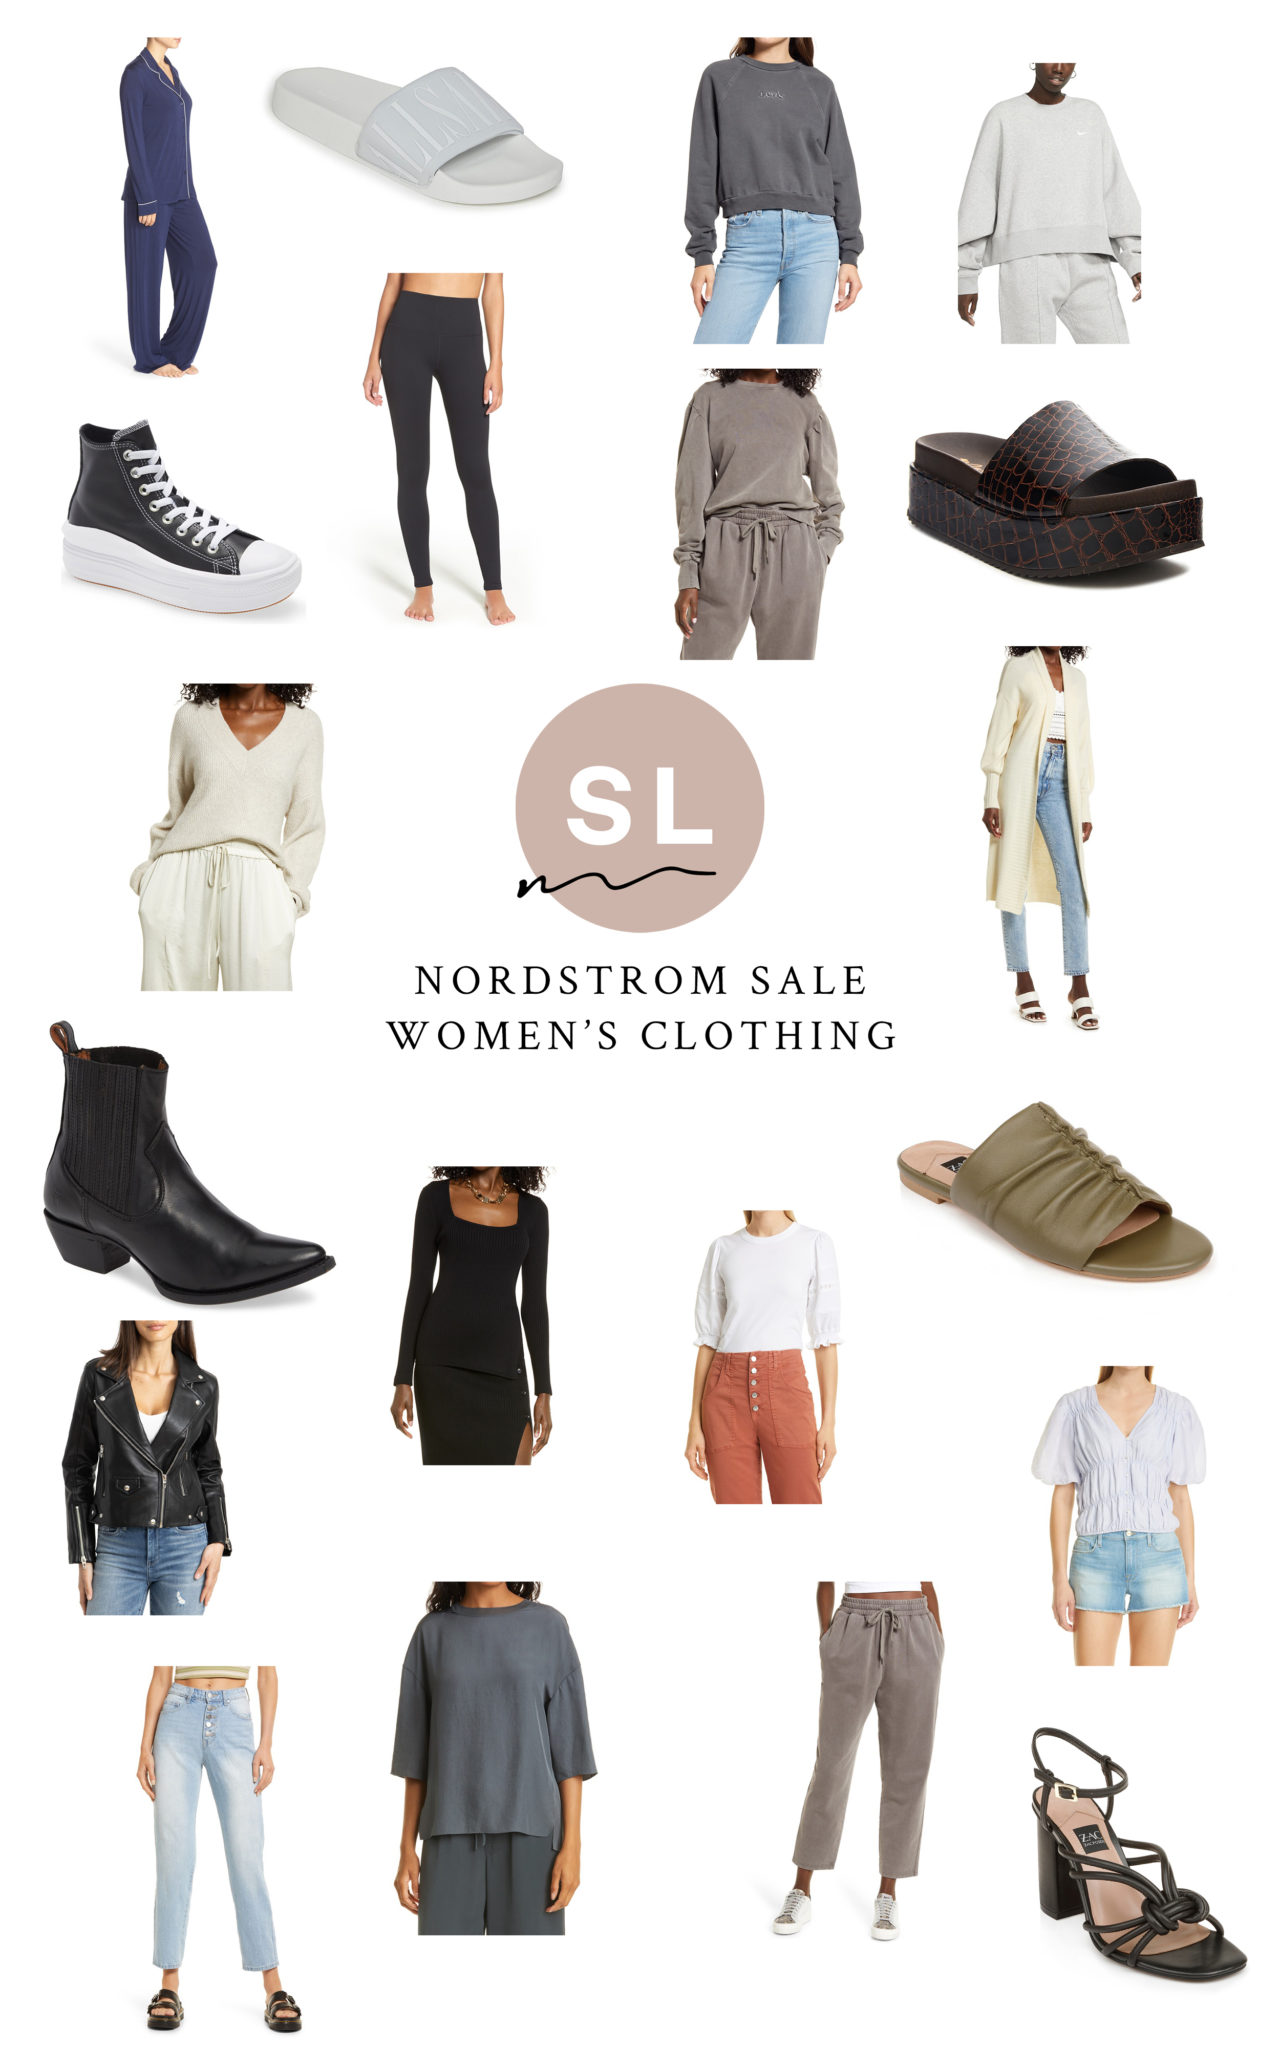 Nordstrom sale women's clothing